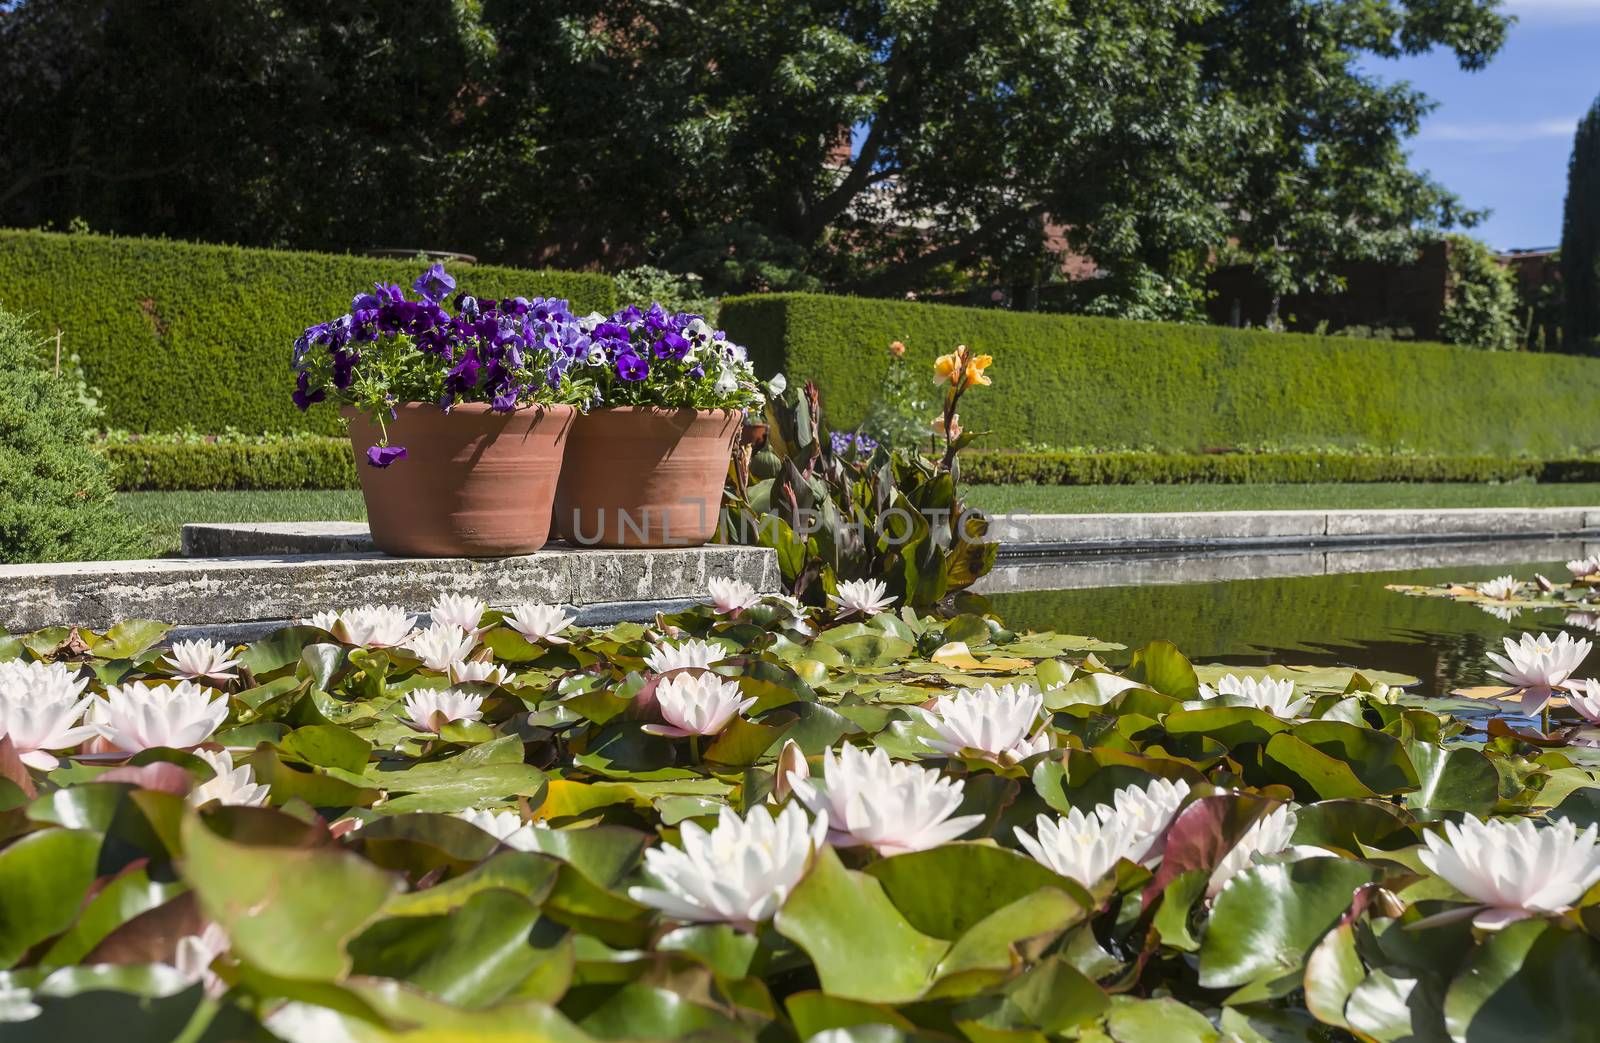 This photo was taken at a formal botanical garden near San Francisco, California. Spring had arrived, and flowers are in bloom. This image features a lily pond, and beautiful blooming Lotus flower with two flower pots with purple flowers.